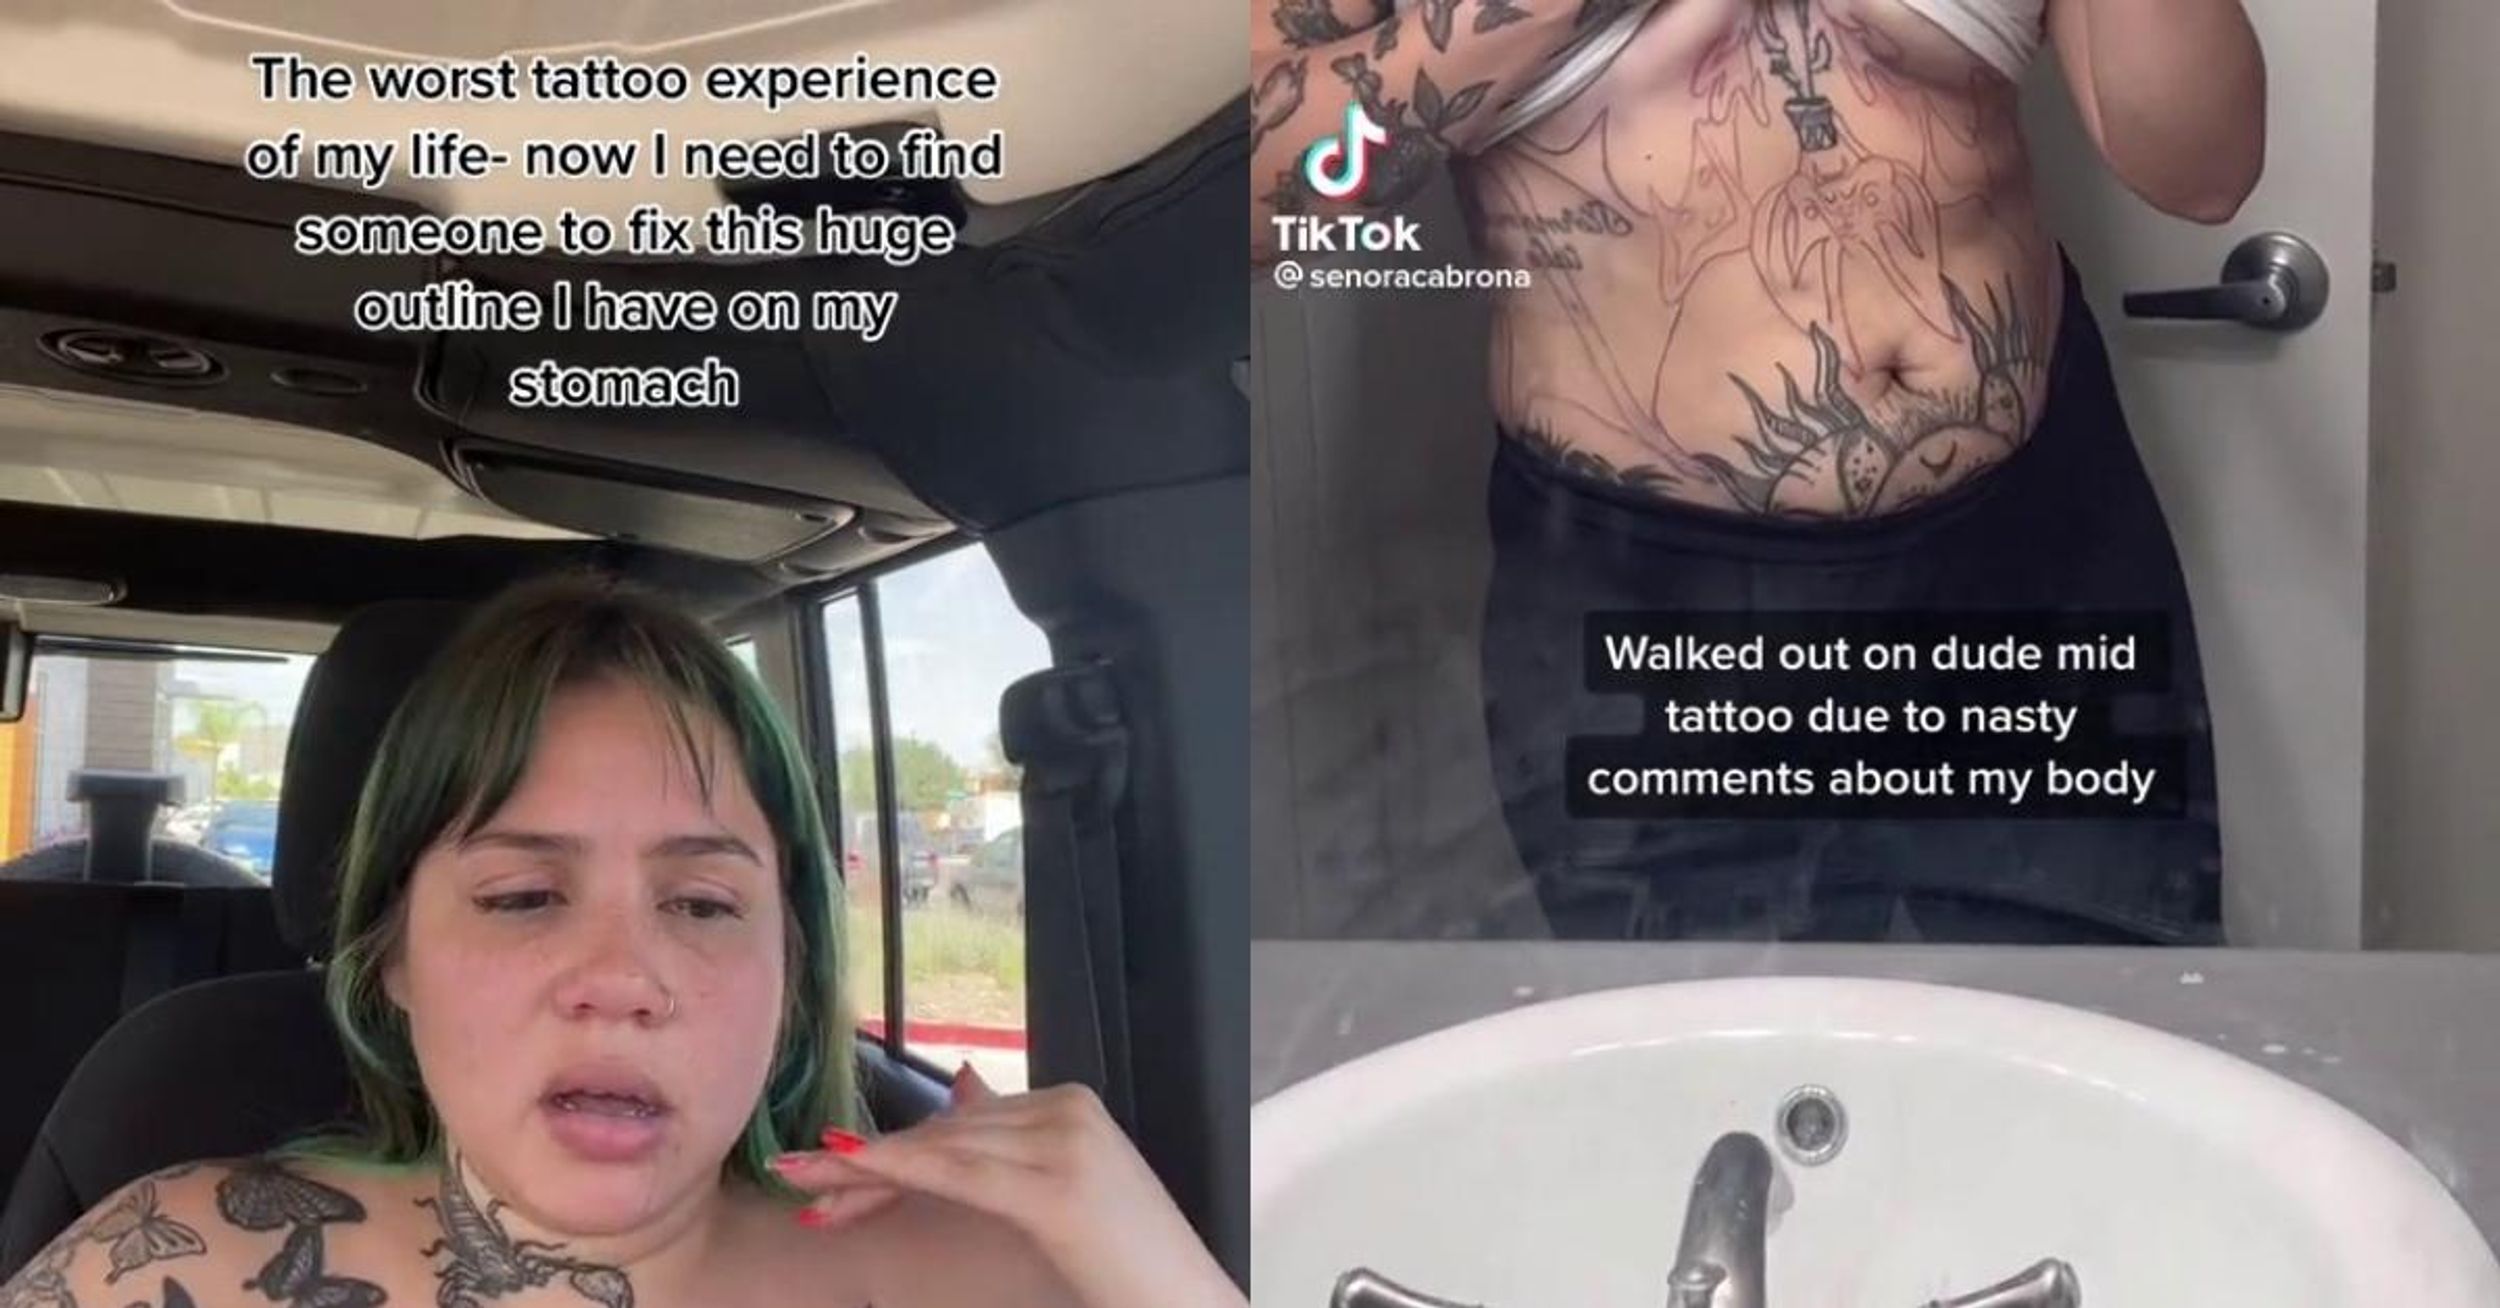 Woman Walks Out In The Middle Of Getting Tattoo After Tattoo Artist's Comments About Her Body